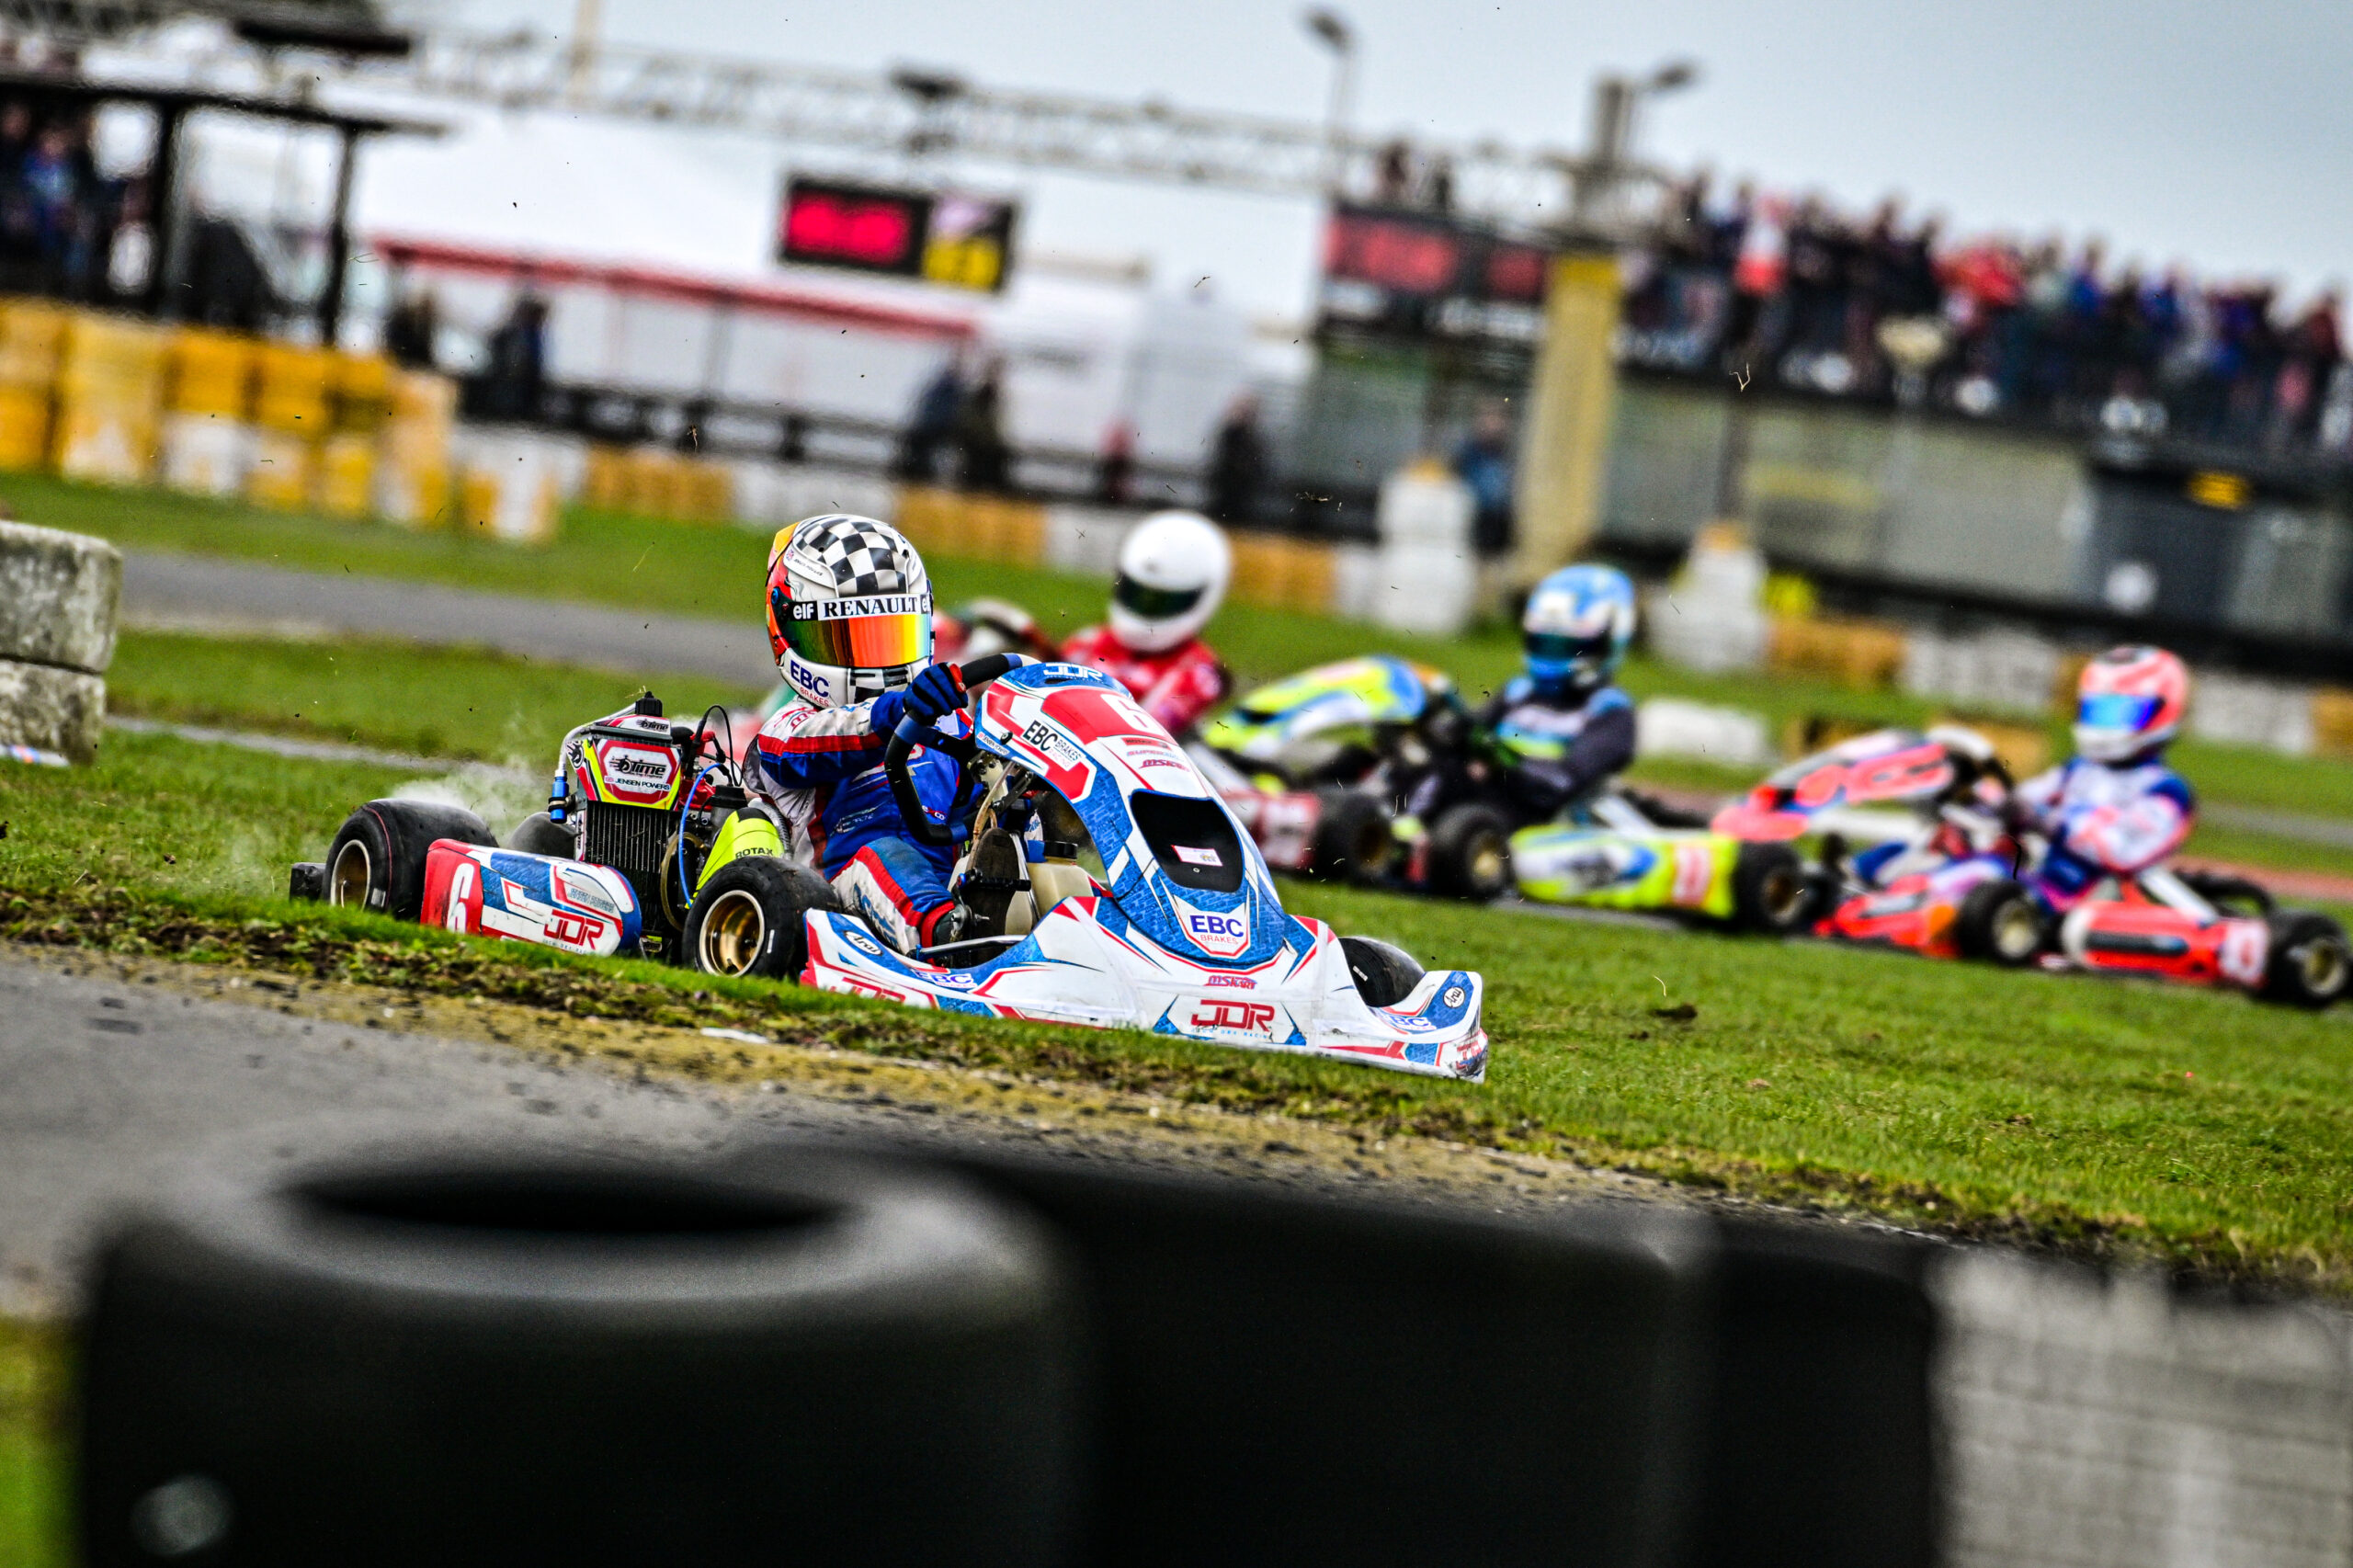 EBC-Equipped Powers Picks up the Pace at Latest Kimbolton Kart Round